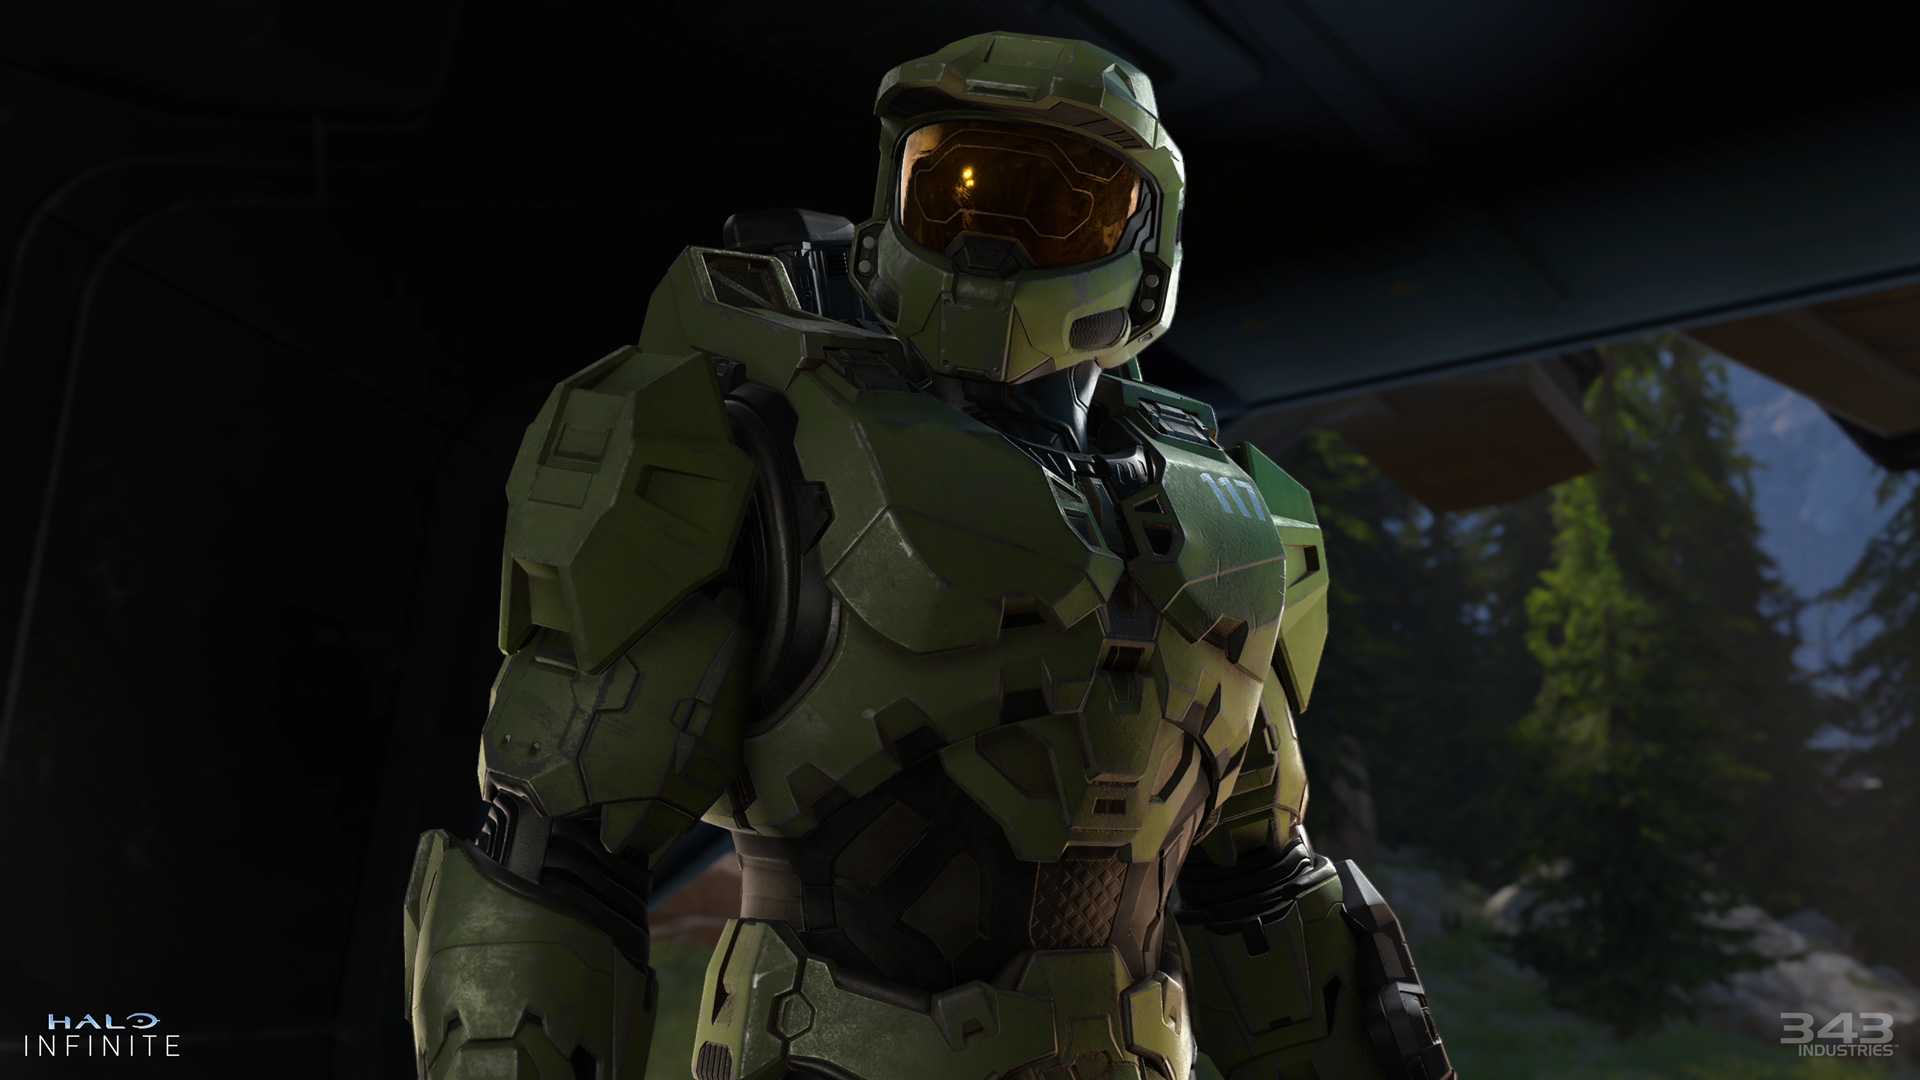 Watch The Teaser Trailer For 'Halo TV' Coming To Paramount+